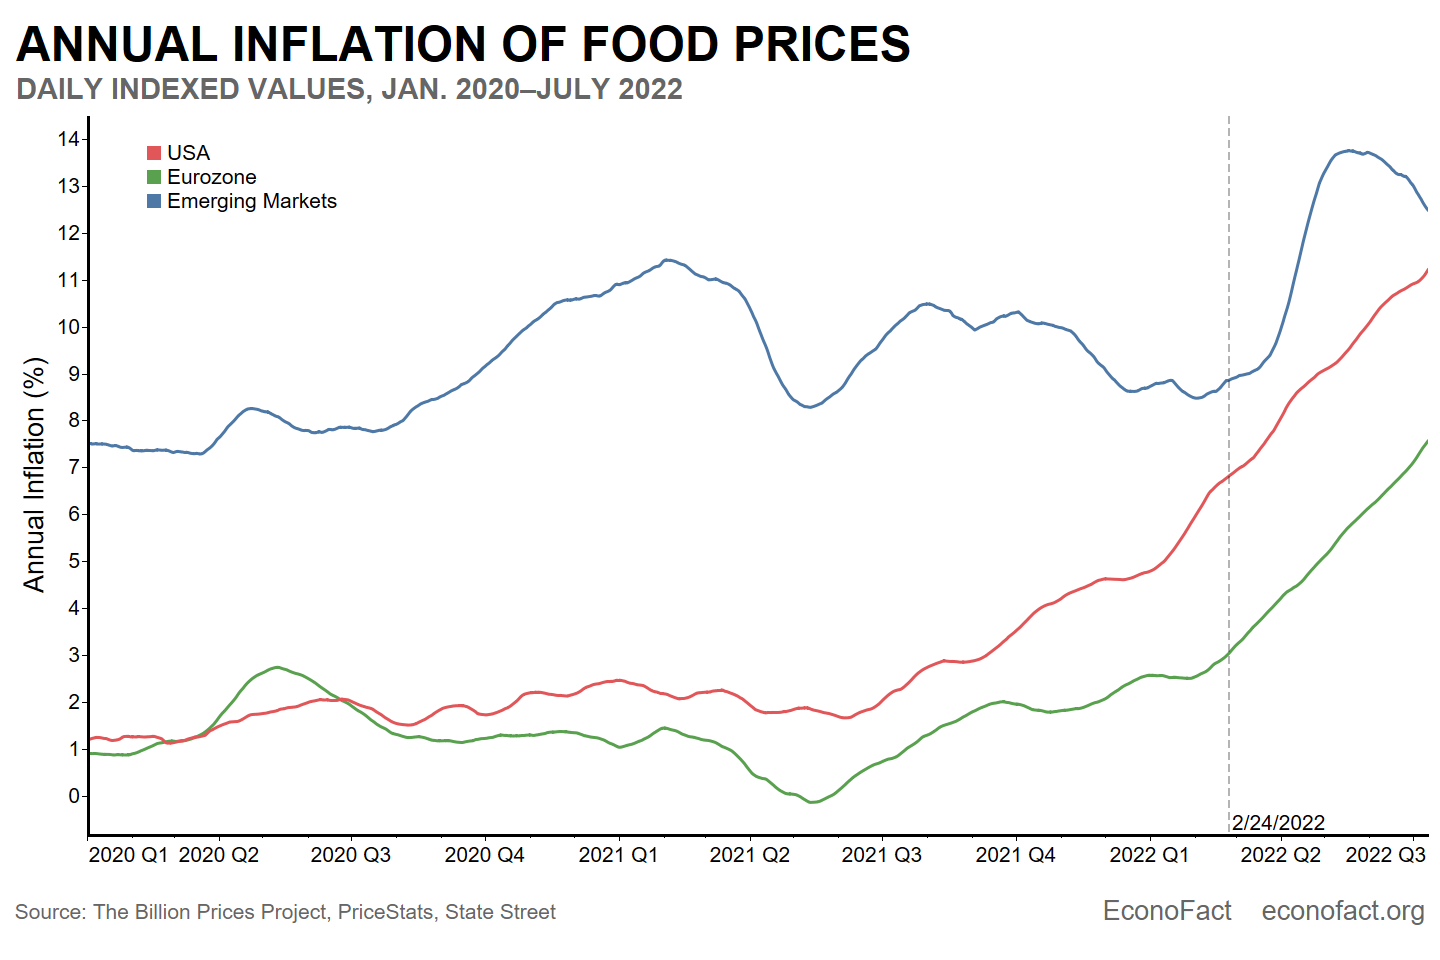 Annualized indexed inflation rates of food prices taken daily. Overall upward trend, with a spike after February 24th, 2022 after Russian invasion of Ukraine. Emerging market rates are generally higher than US and Eurozone inflation rates.